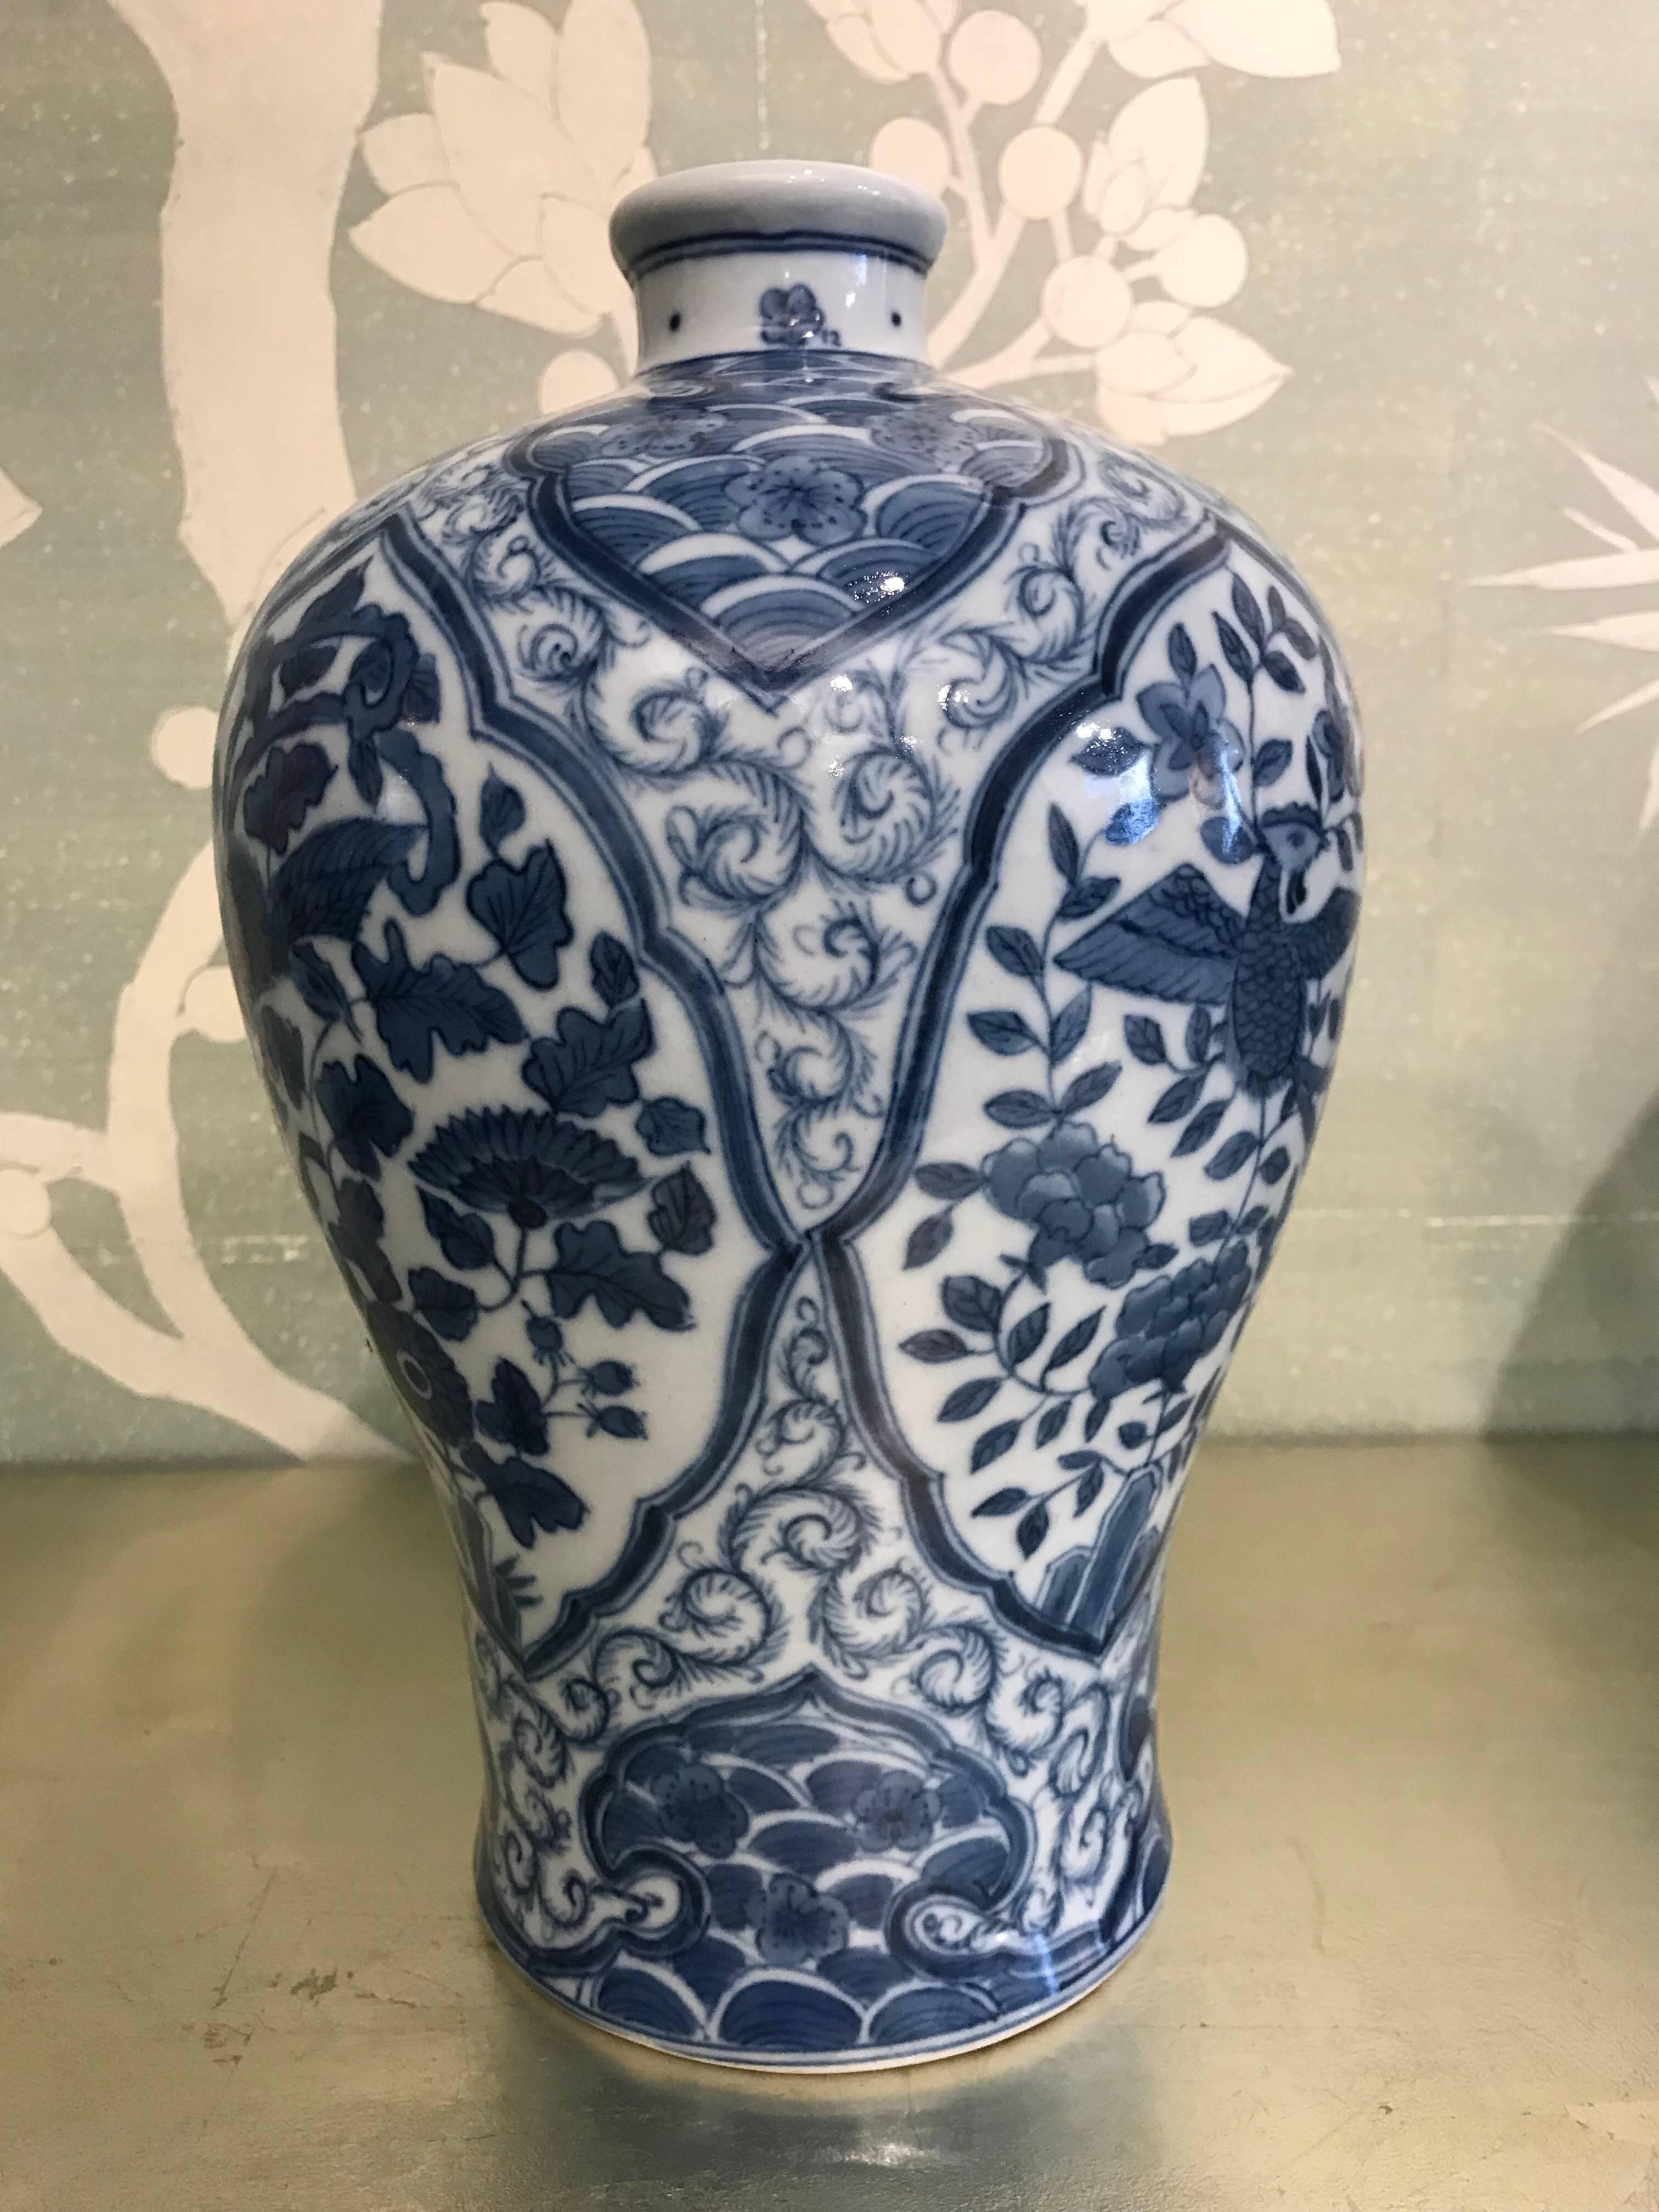 Pair of Korean mid-20th century blue and white vases with reserves of birds, flowers, and wave borders.